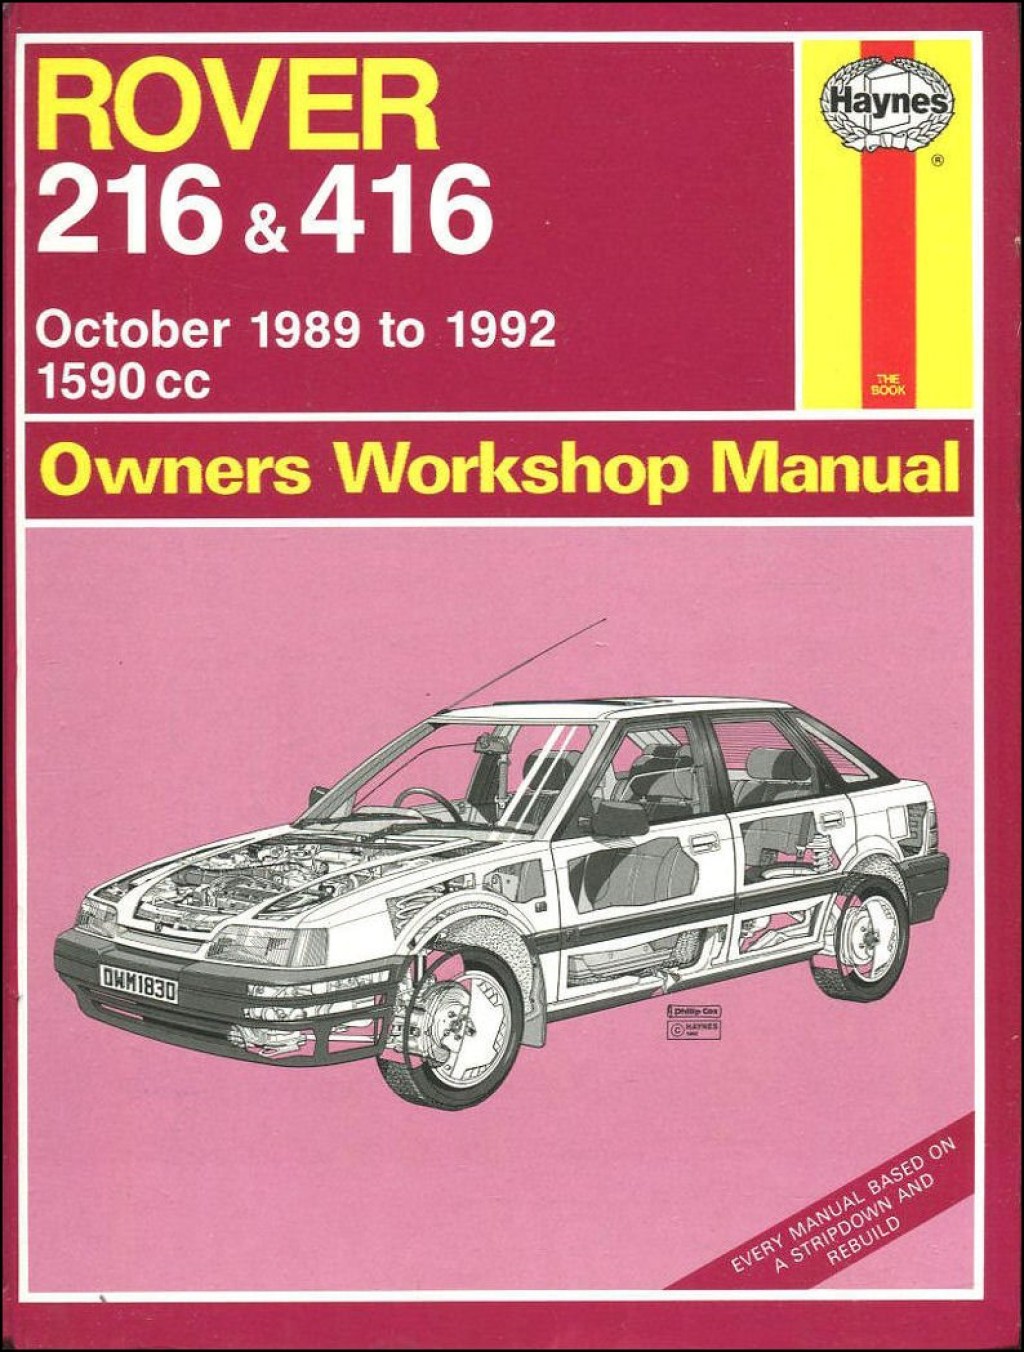 Picture of: Rover  and  Owners Workshop Manual  Amazon.com